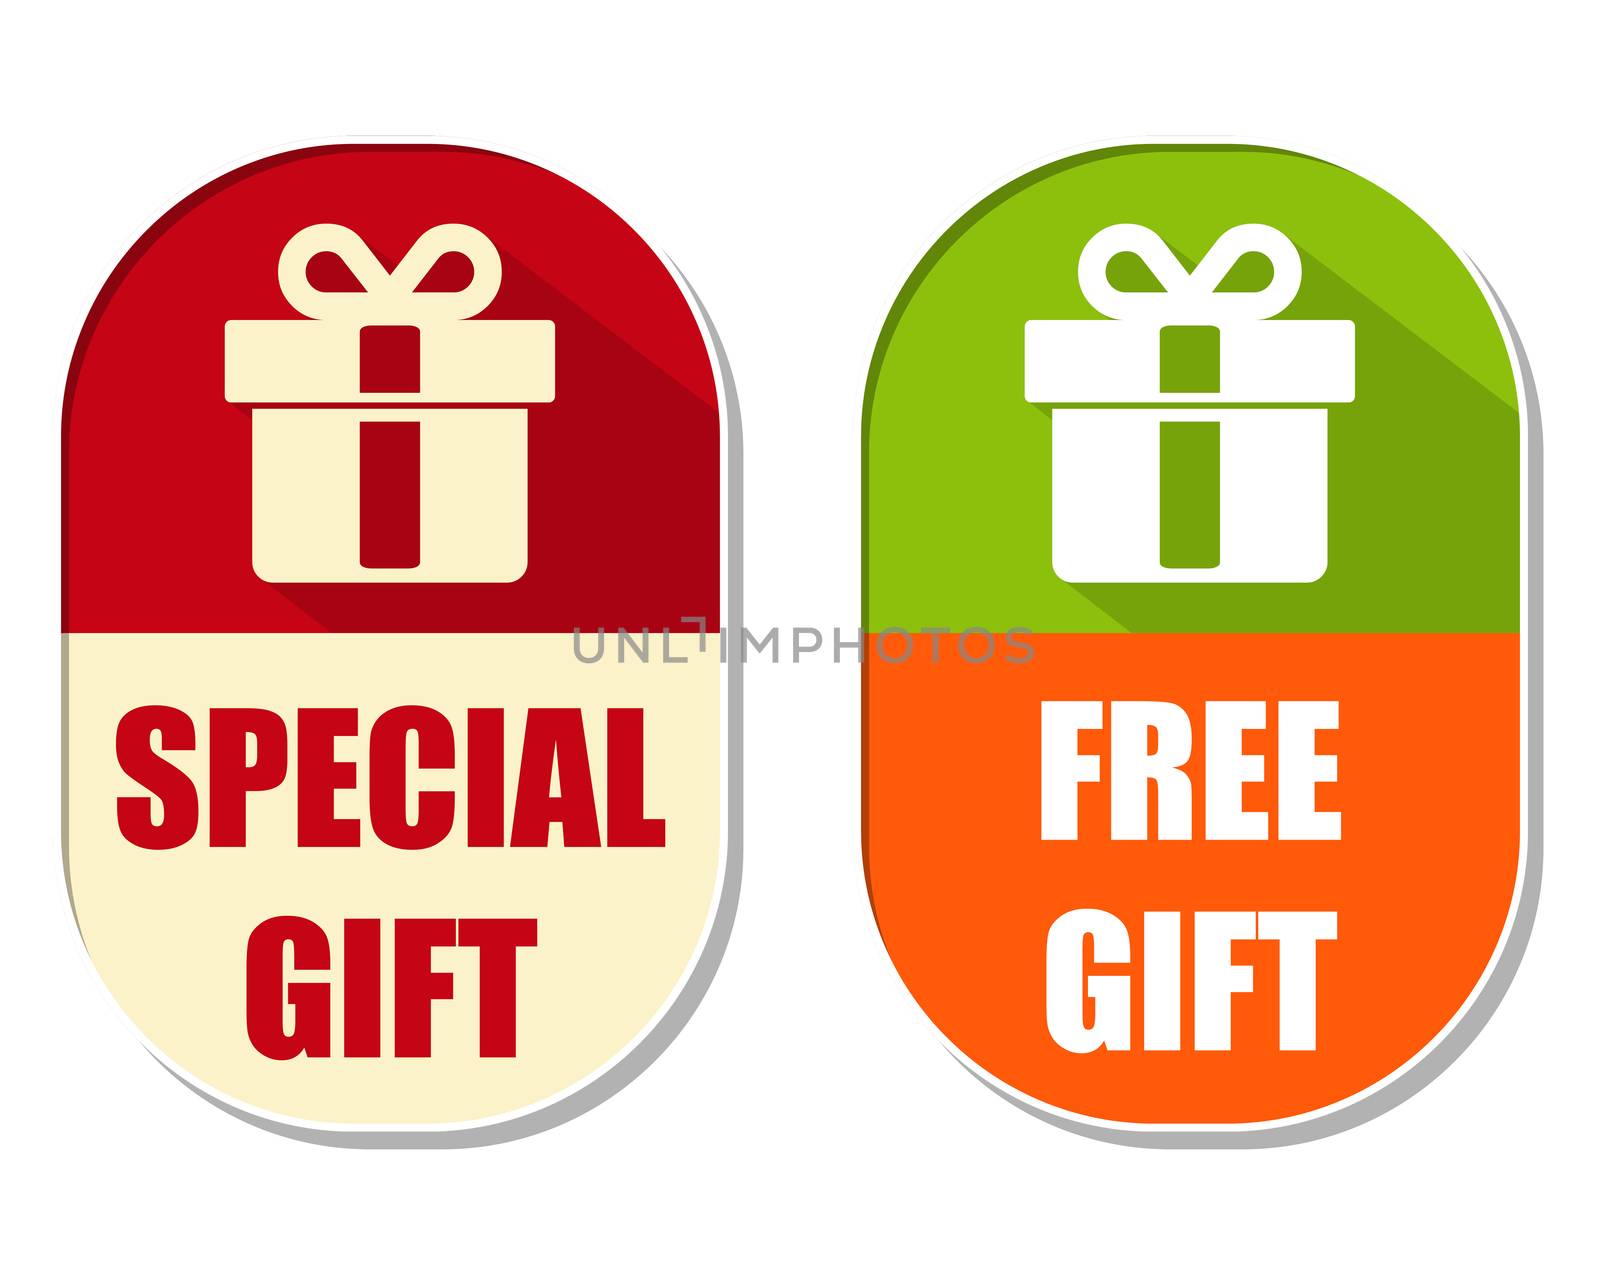 special and free gift with present box sign, two elliptical labe by marinini